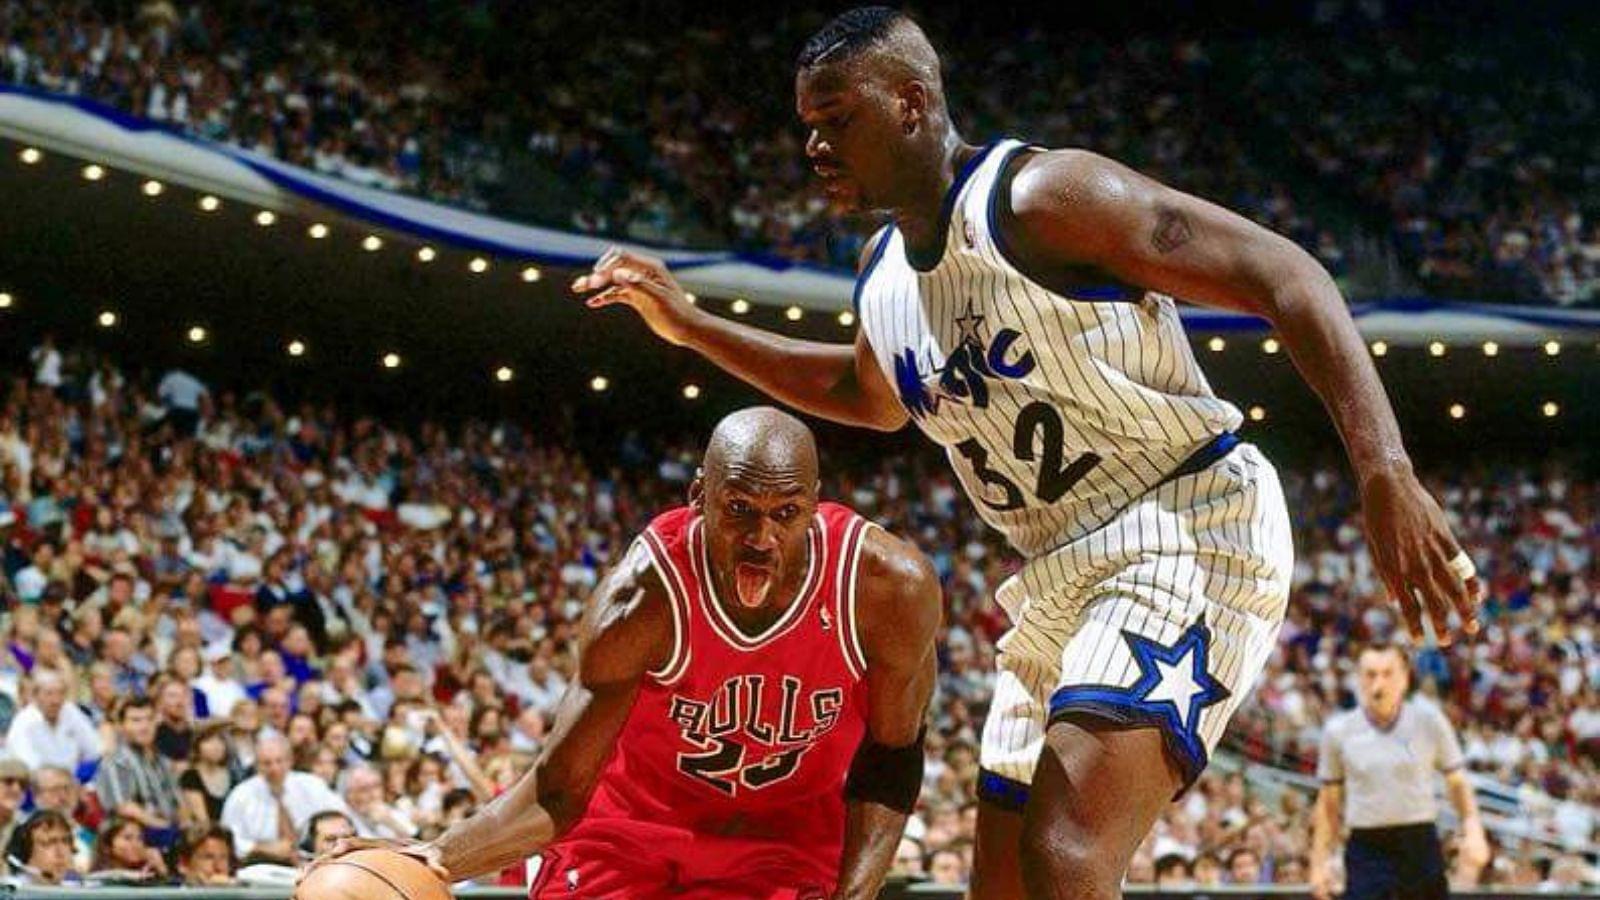 “Michael Jordan was the best in the game, and I wanted his spot”: 7ft 1’ Shaquille O’Neal ‘studied’ Bulls GOAT to replace him